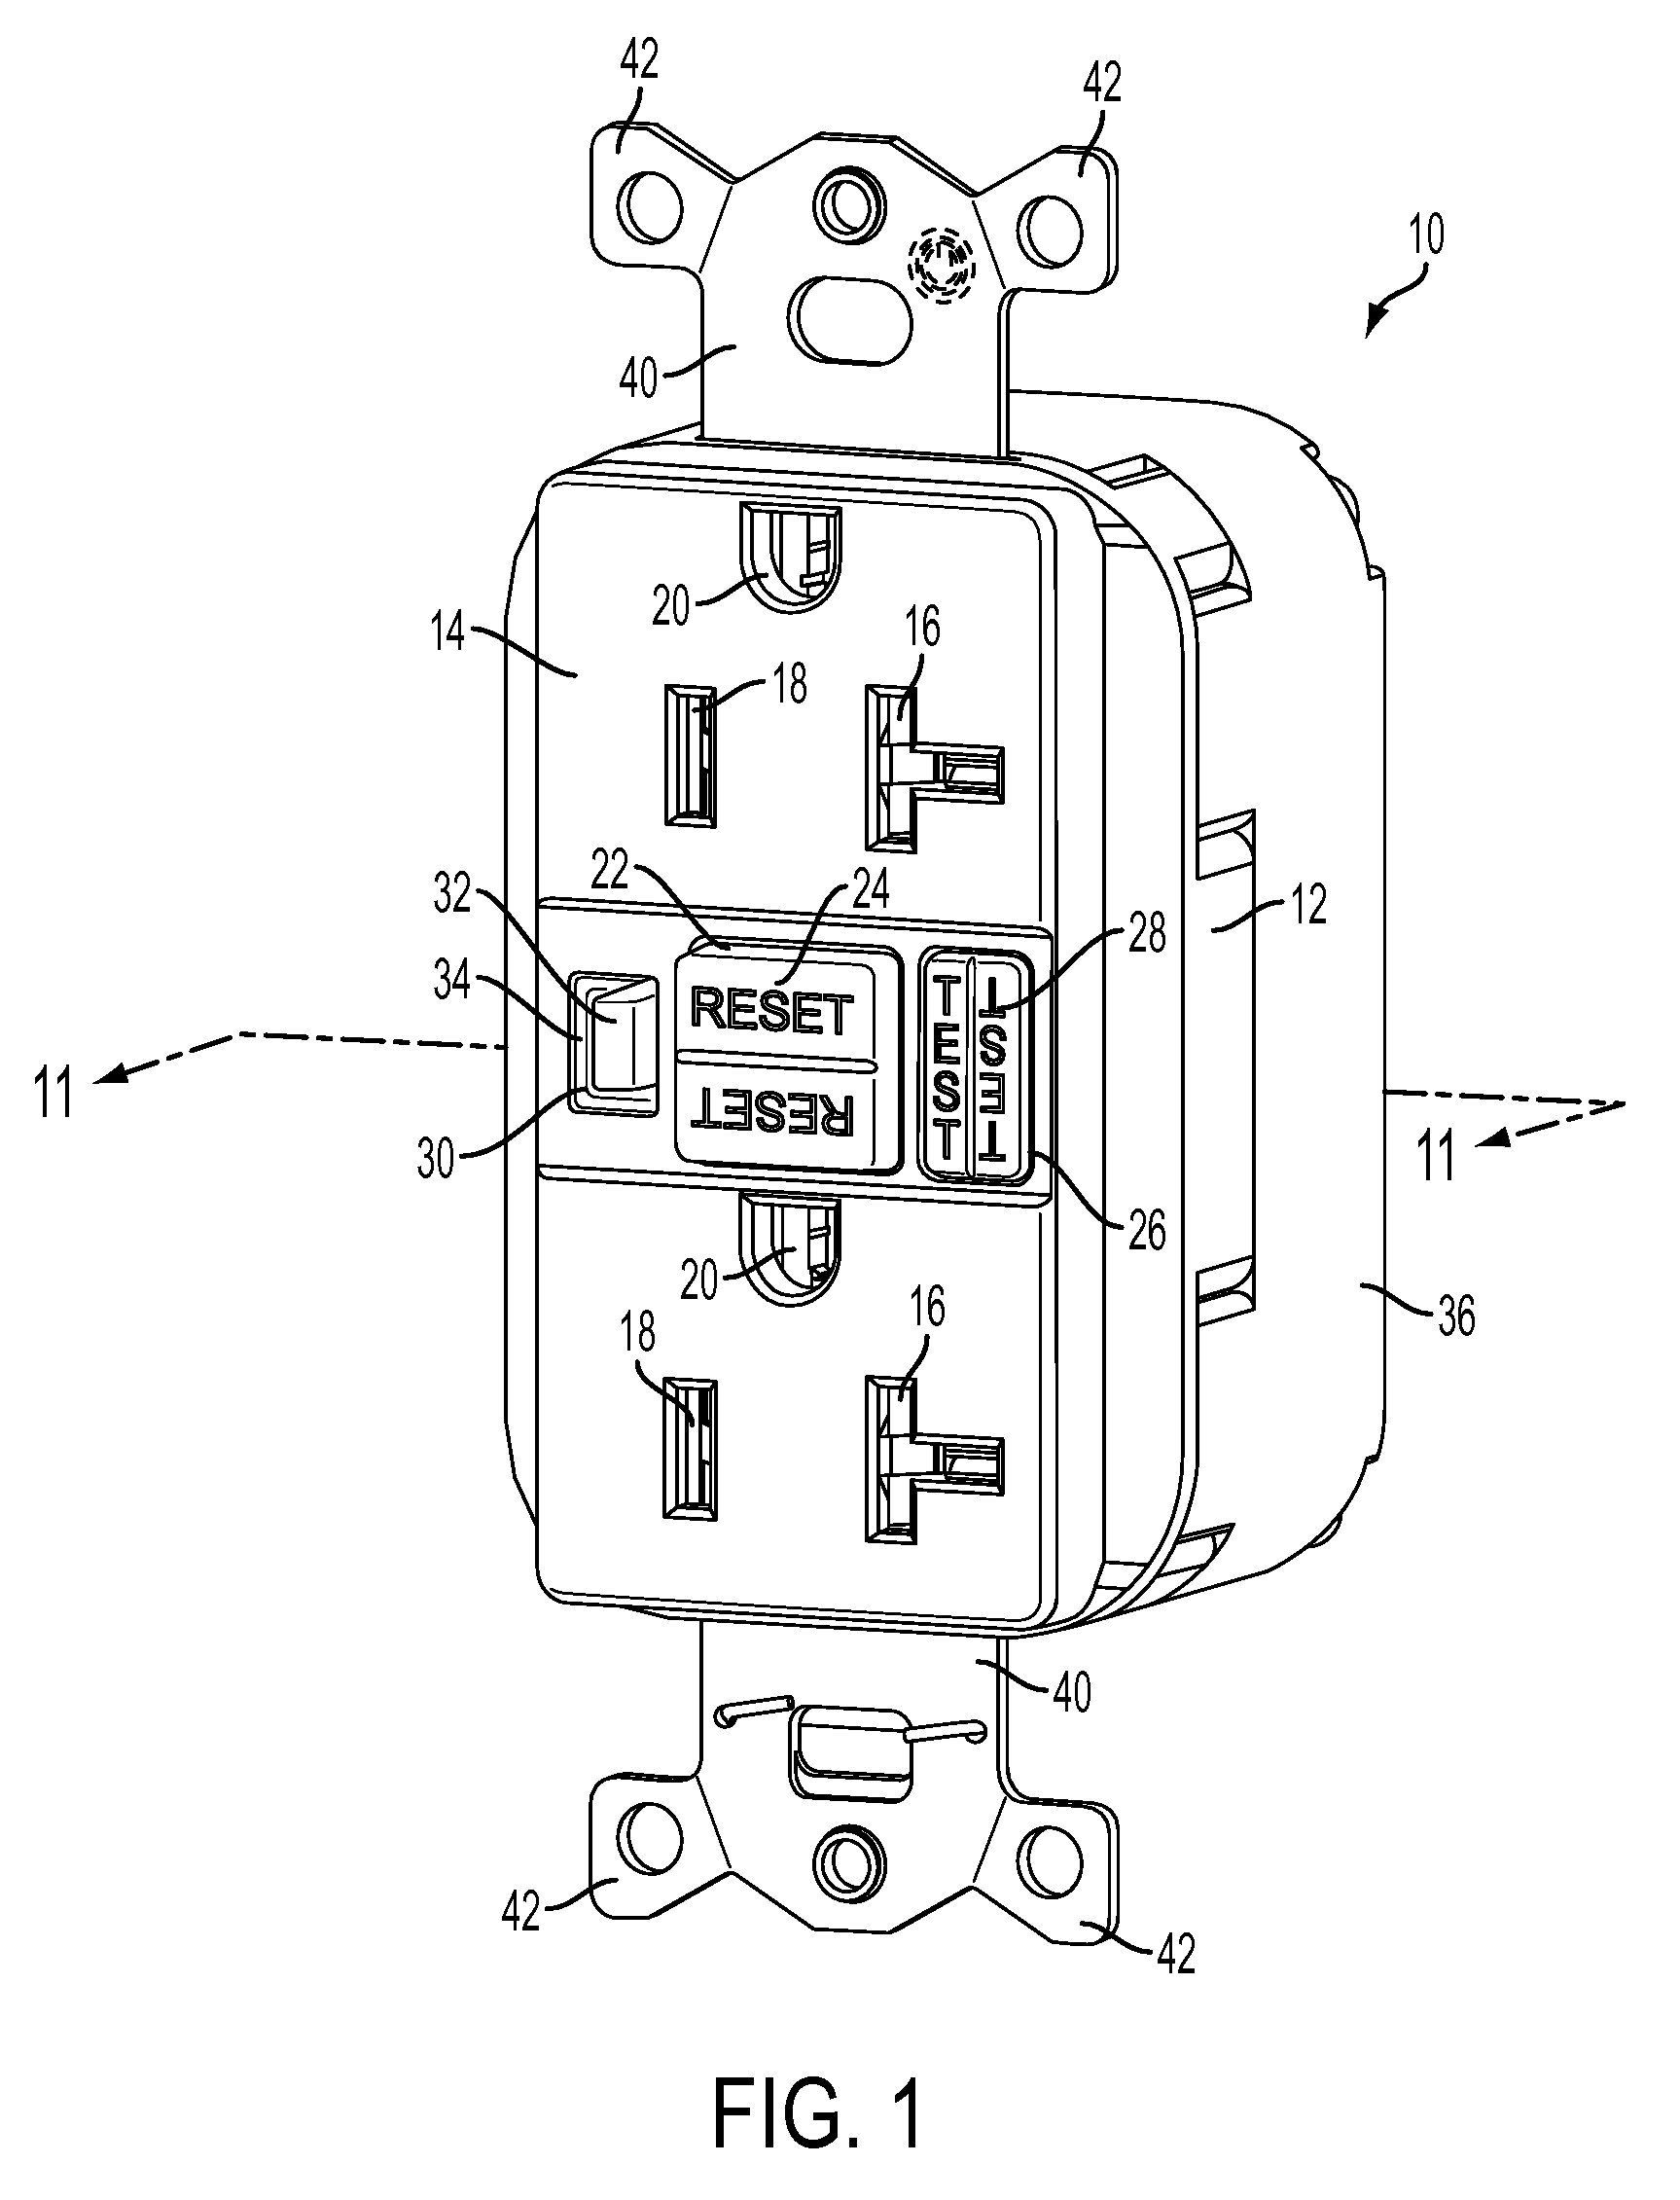 Enhanced Auto-Monitoring Circuit and Method for an Electrical Device